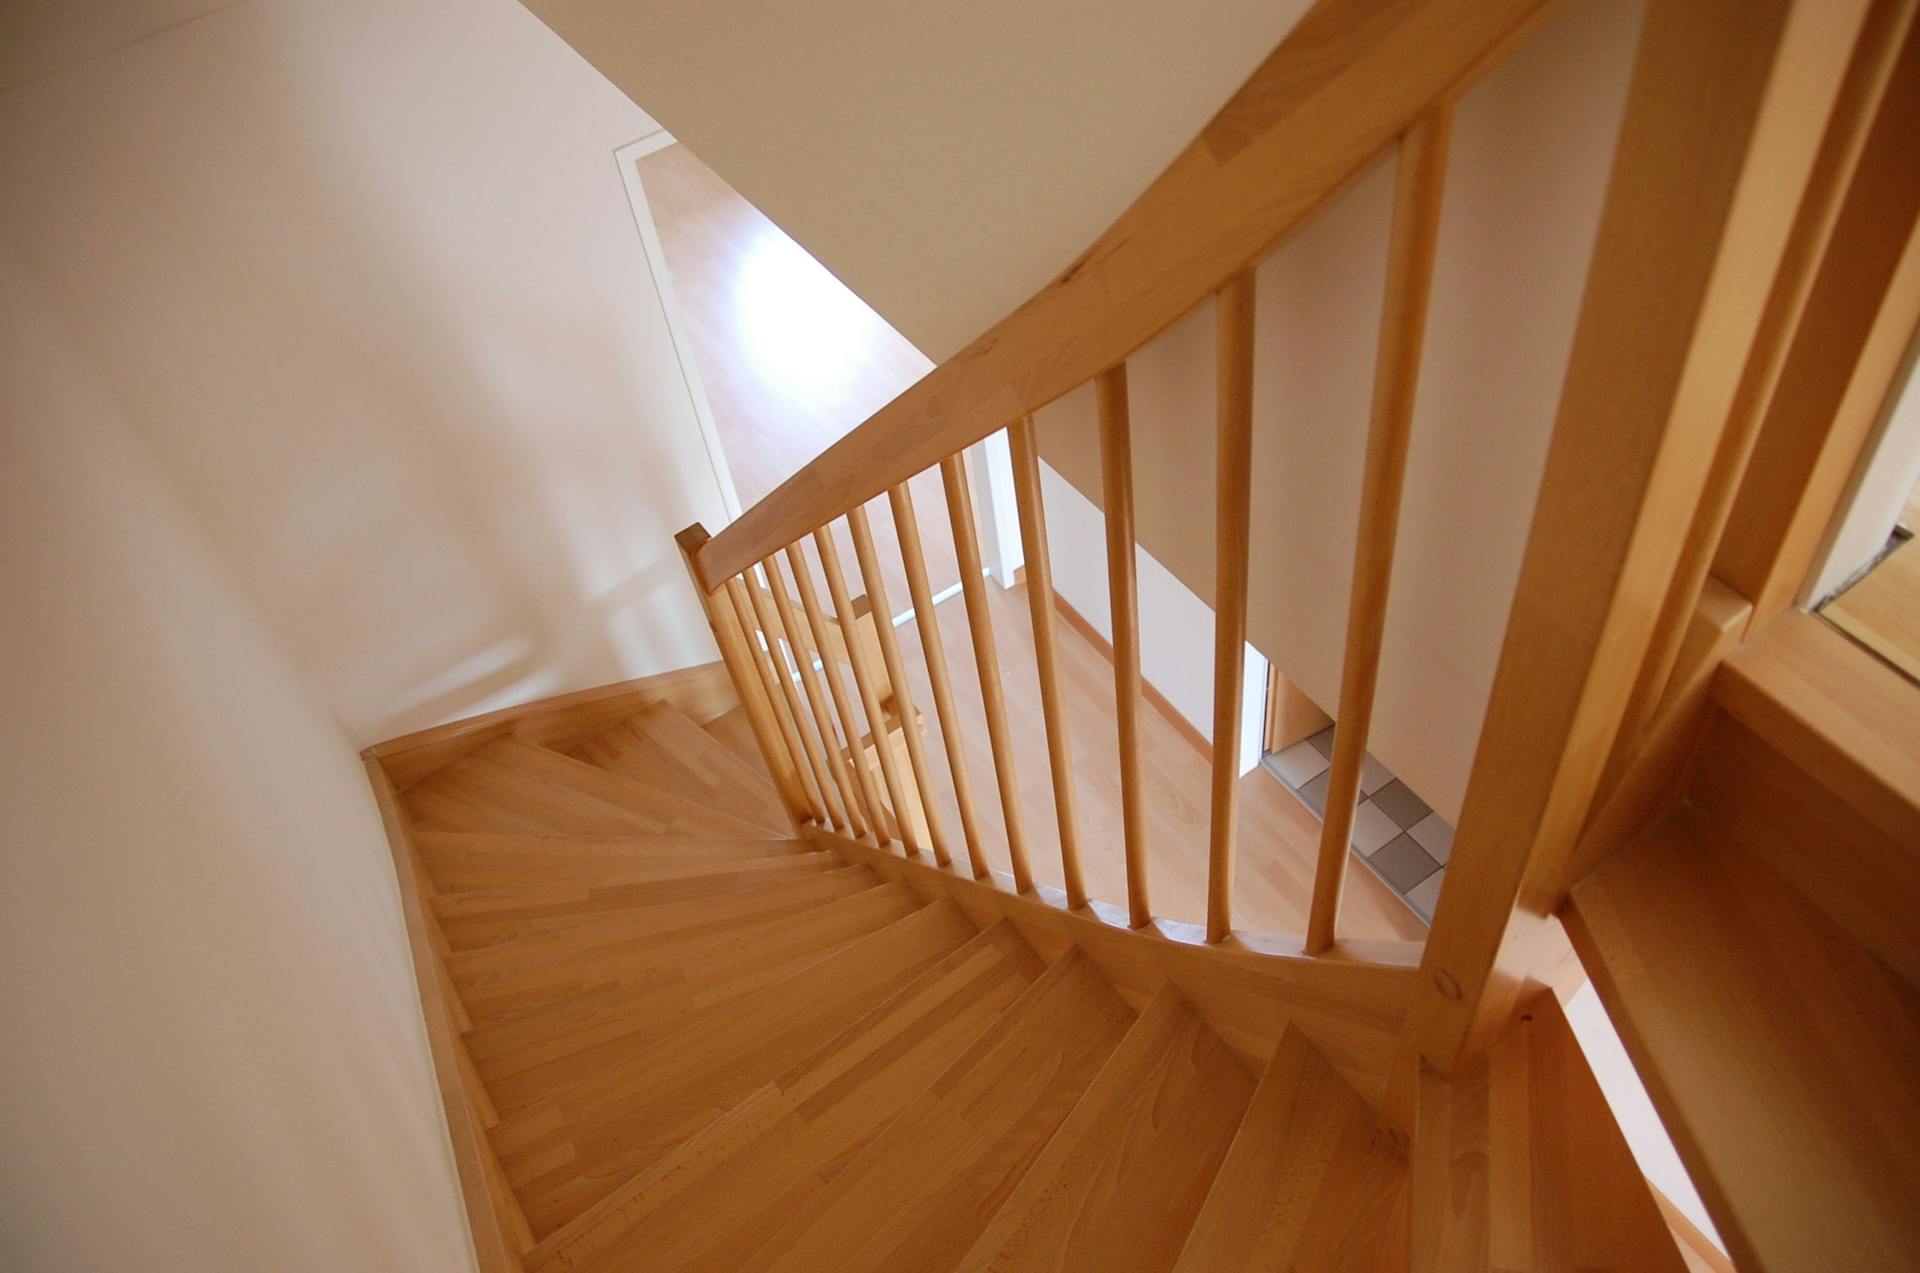 A wooden staircase | Source: Pexels